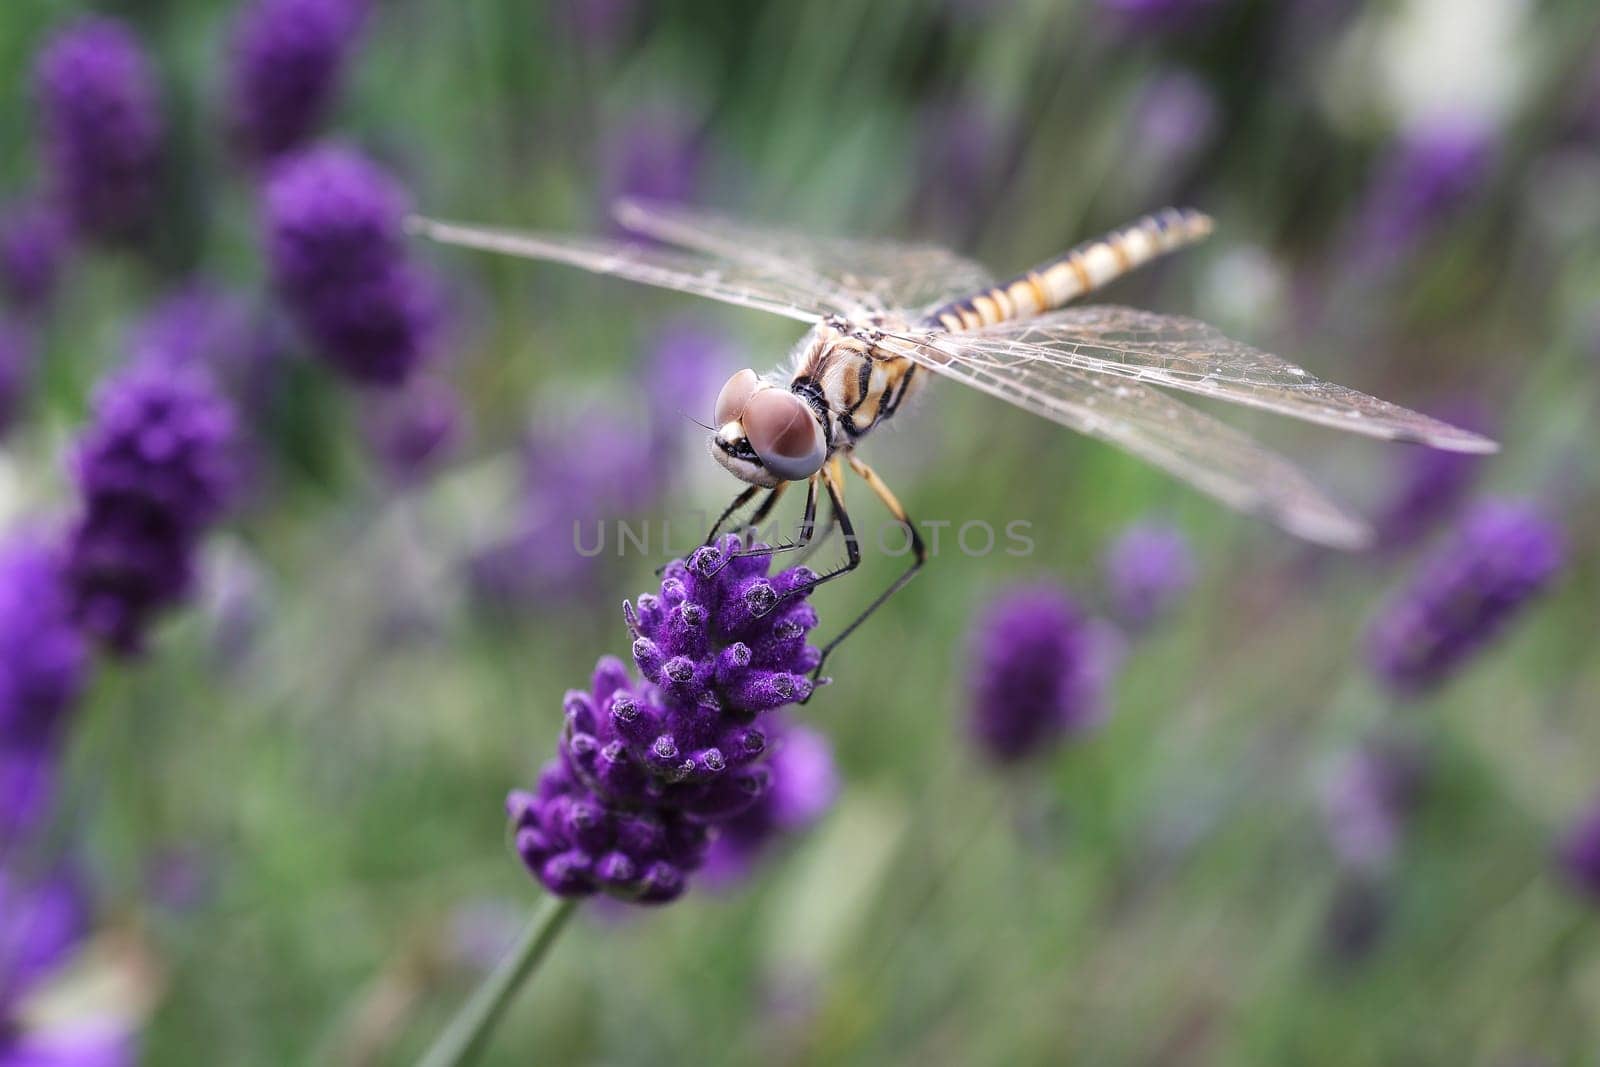 Golden dragonfly perched on a thin stalk in a field of lavender flowers.